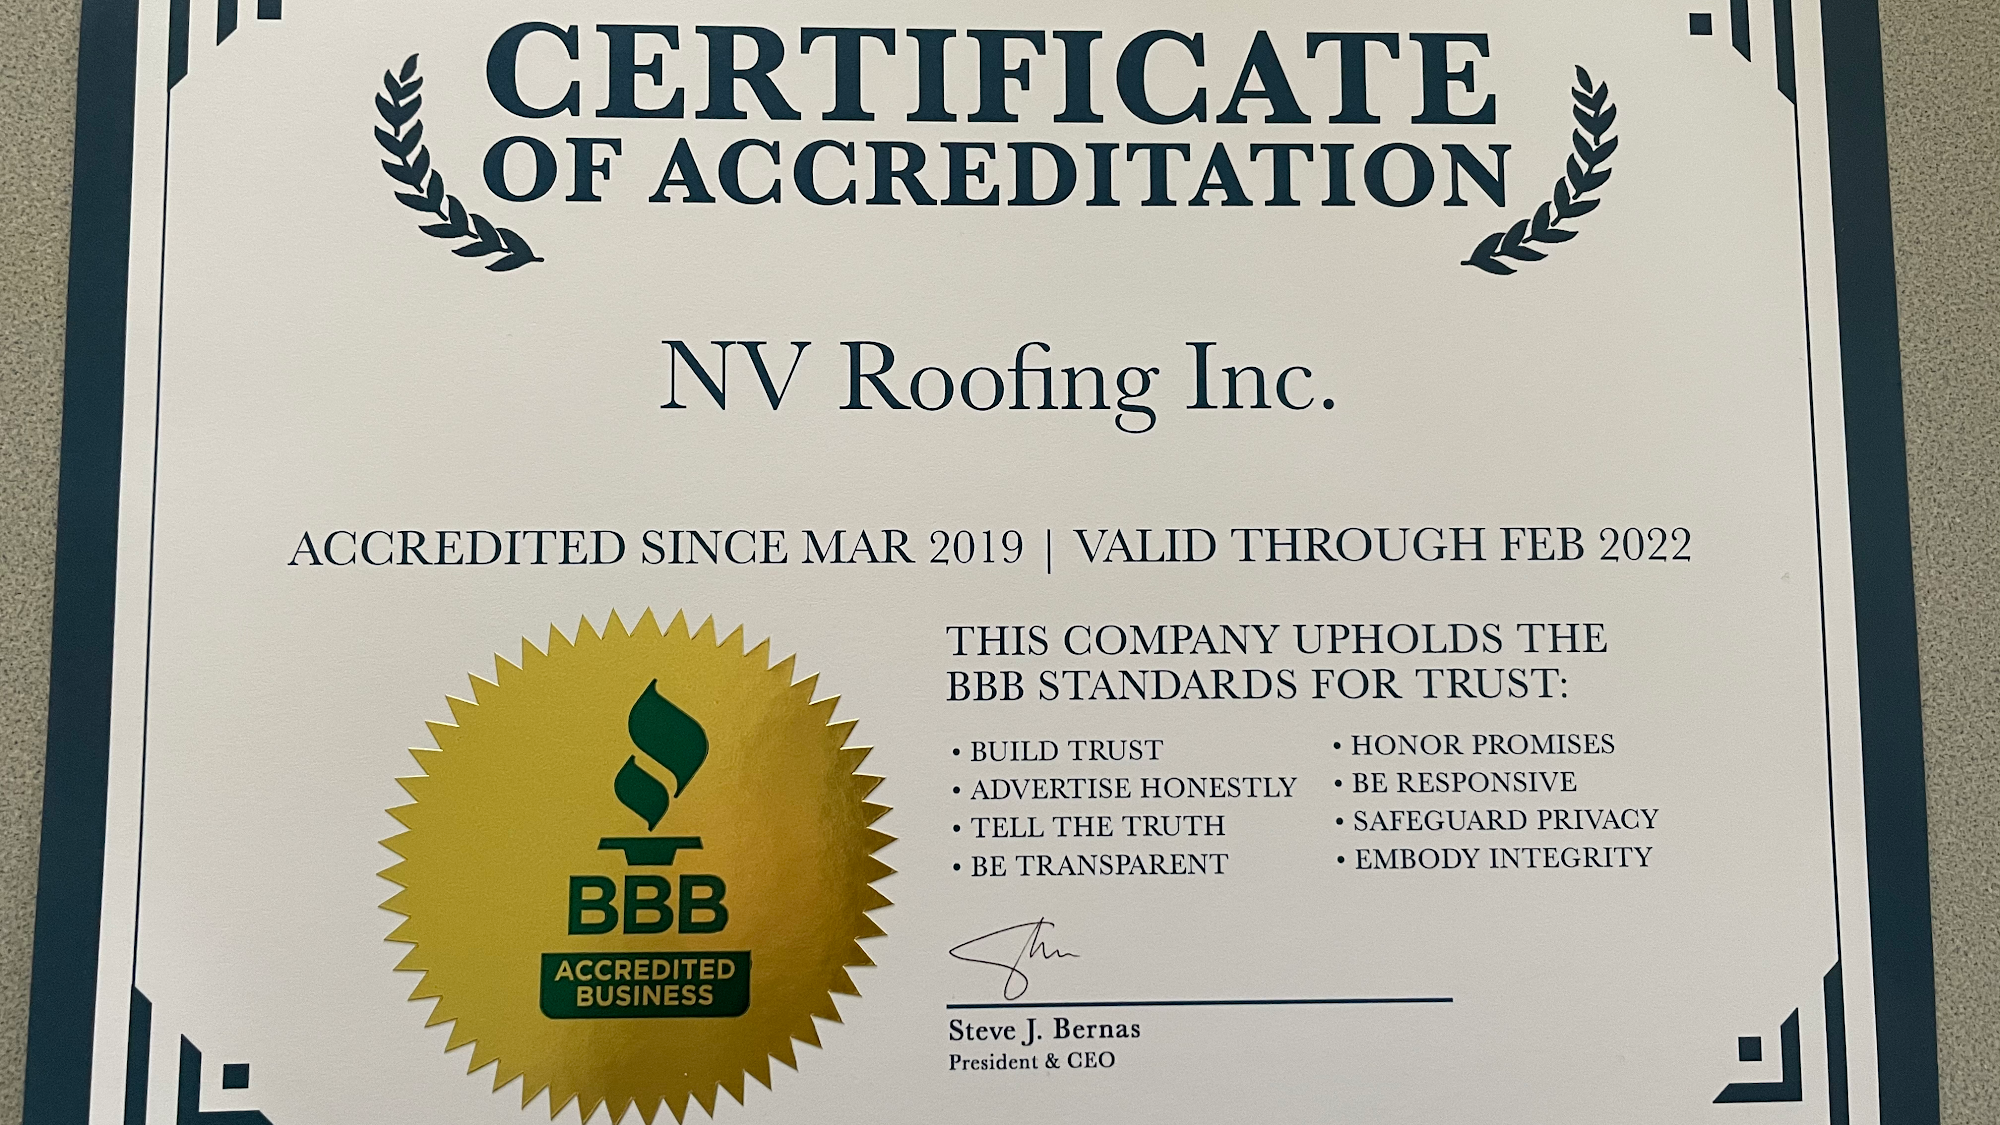 NV Roofing Inc